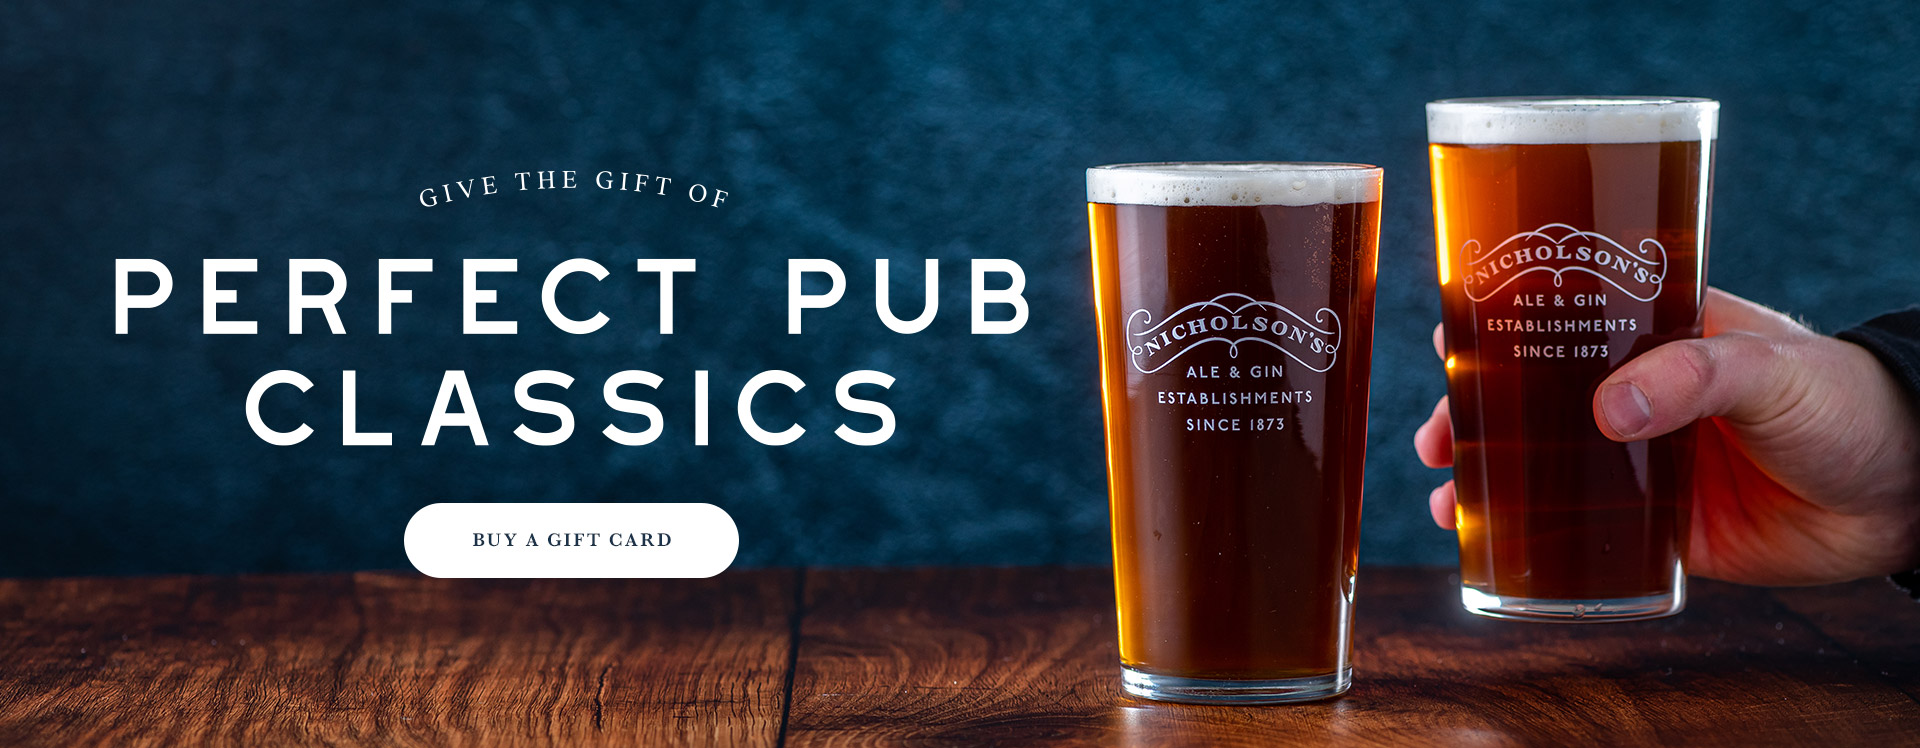 Nicholson’s Pub Gift Voucher at Flying Horse in London